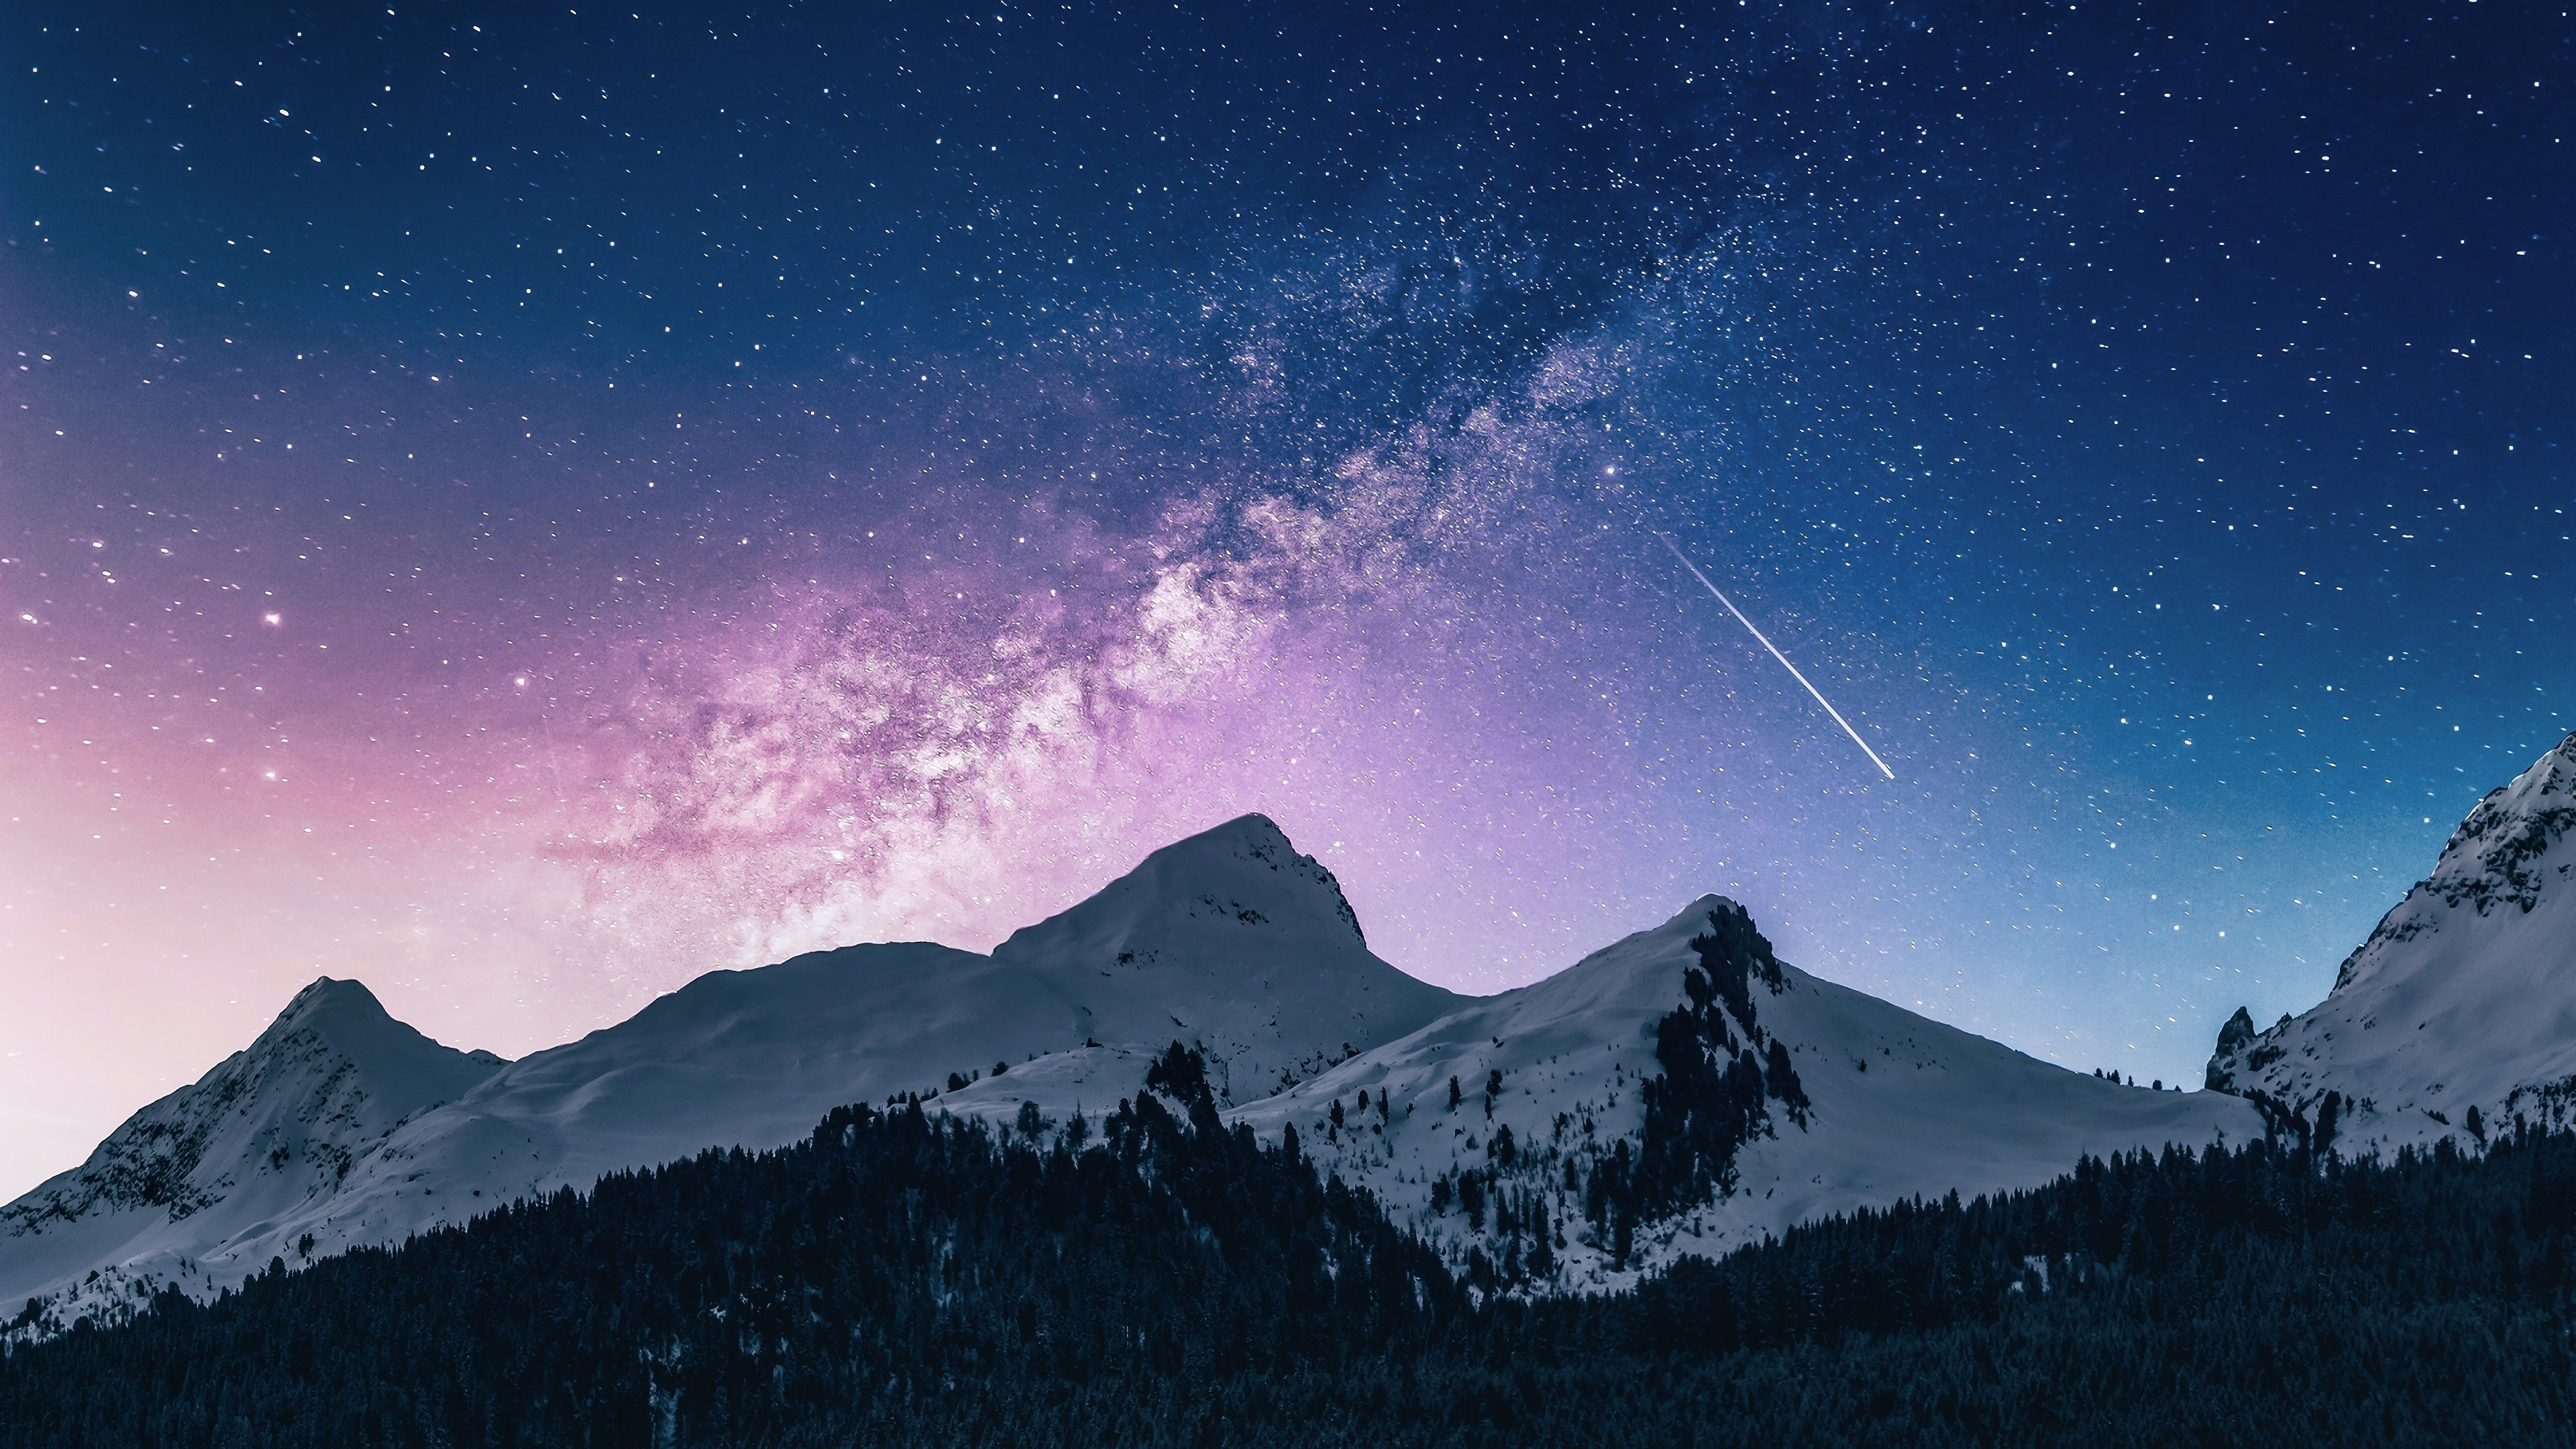 Snowy Mountains Sky With Stars And Comet Wallpaper 4k Ultra Hd Id 3037